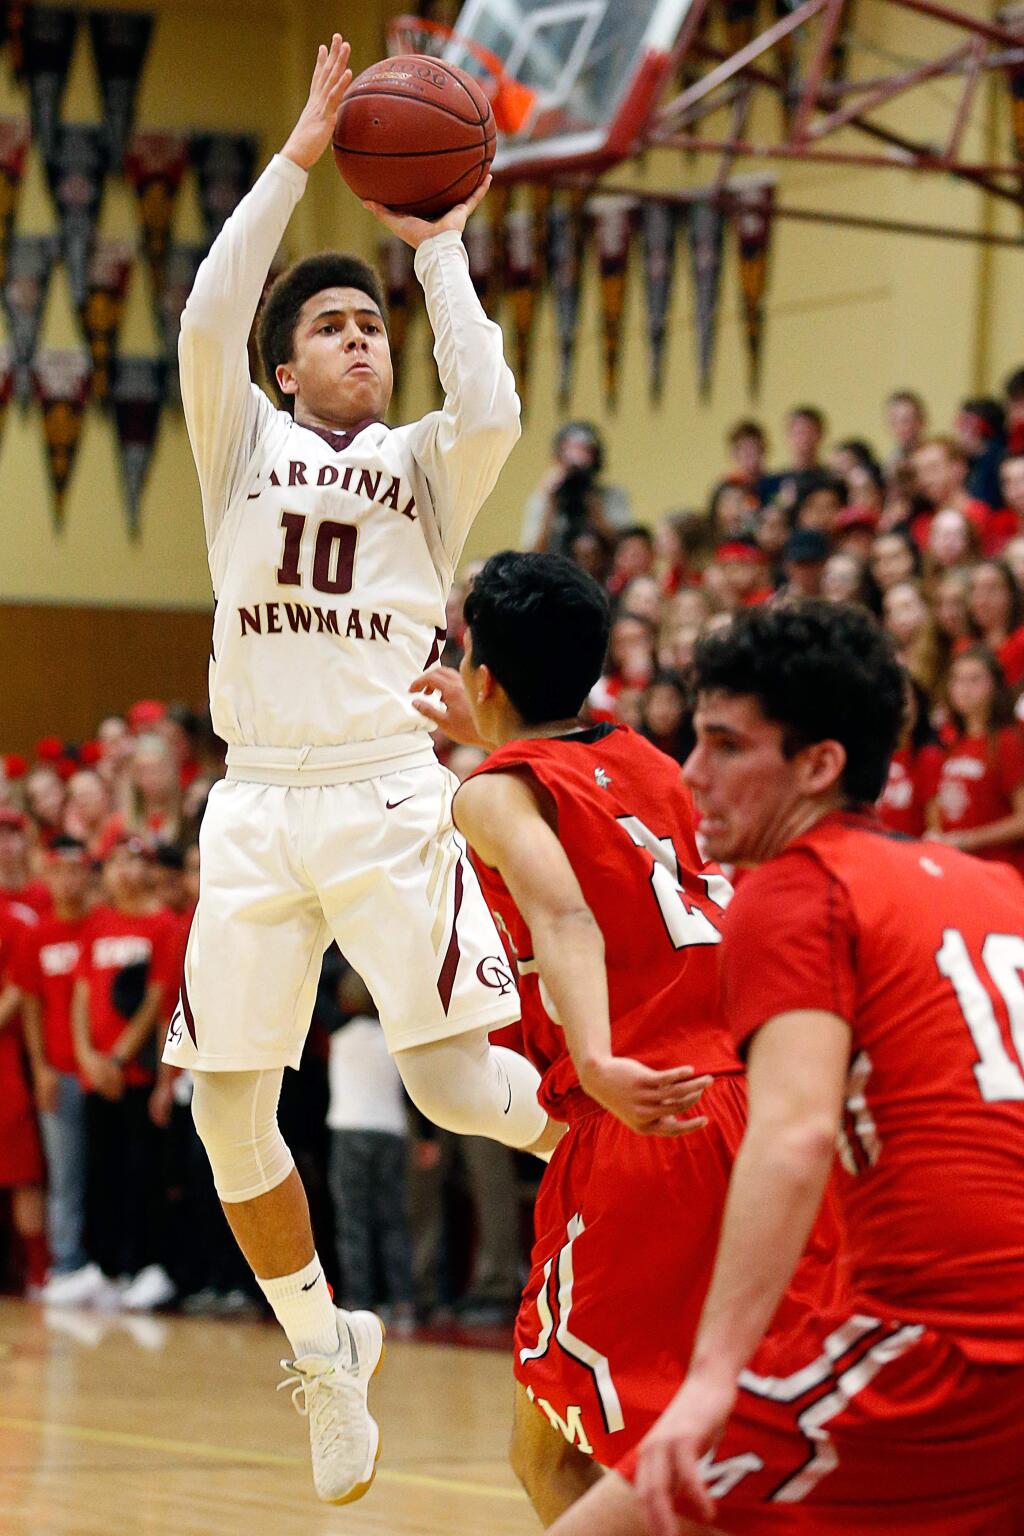 Cardinal Newman's Damian Wallace (10), left, puts up a shot while defended by Montgomery's Alex Soria (21) during the second half on Friday, Jan. 13, 2017. (Alvin Jornada / The Press Democrat)